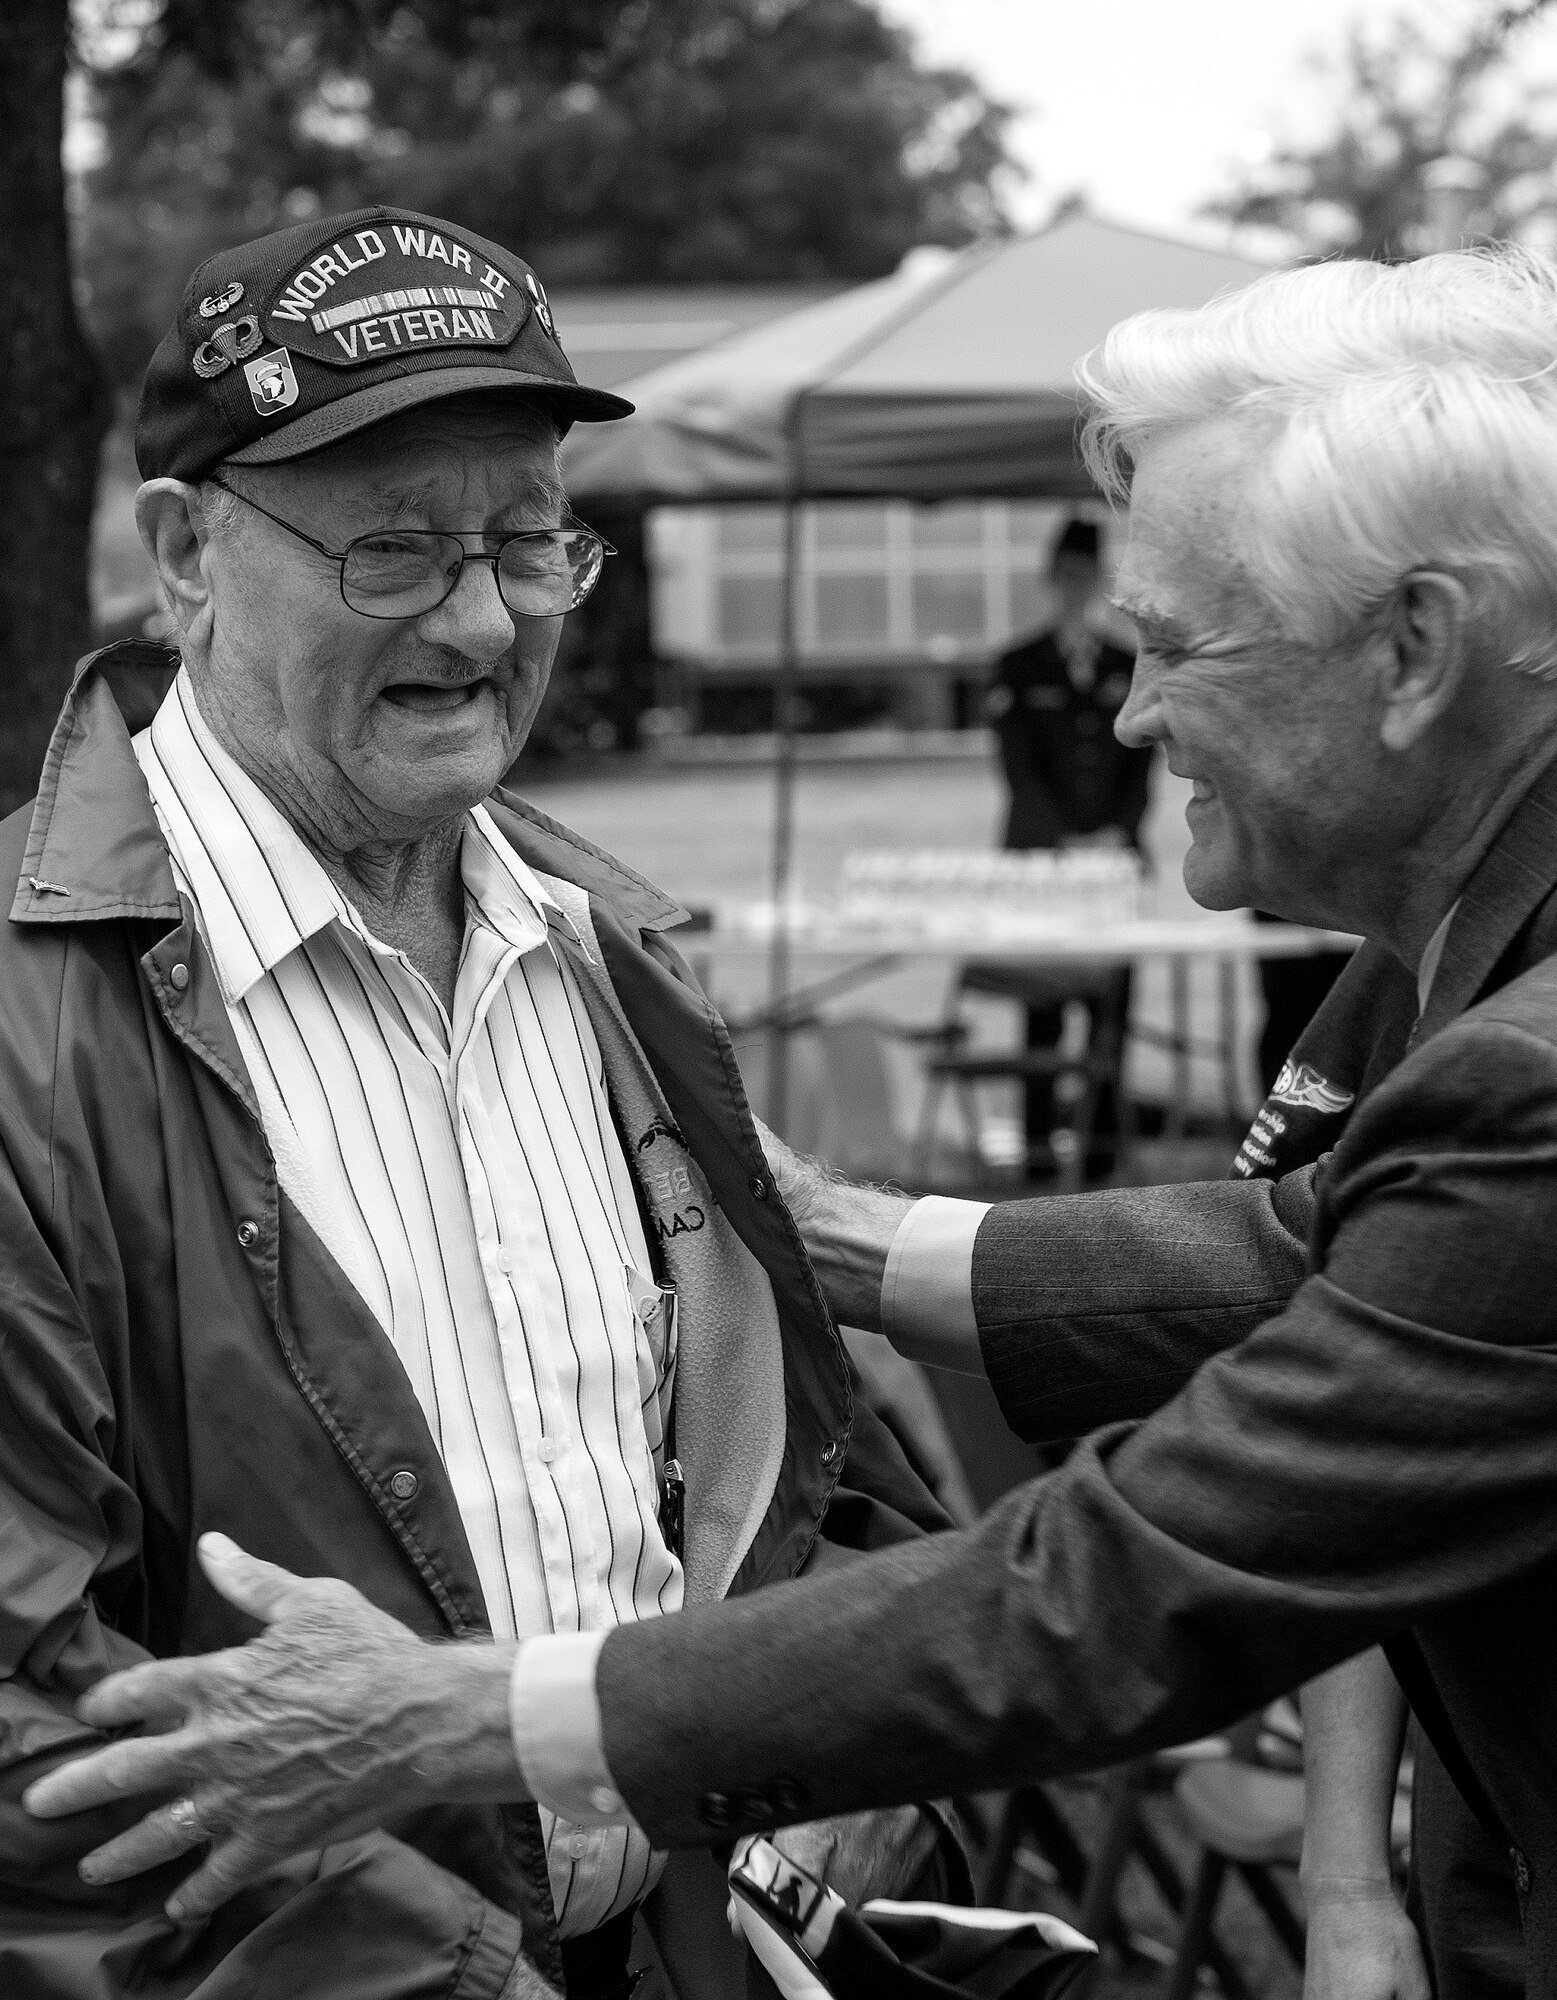 Allen Orndorff, a World War II veteran from the 101st Airborne Division, and Lt. Col. (ret.) Barry Bridger, a six-year POW during the Vietnam War, share a laugh after a Prisoner of War/Missing in Action closing ceremony at Joint Base Langley-Eustis, Va., Sept. 16, 2016. Orndorff, Bridger and members of Team Langley attended the ceremony in remembrance of the service and sacrifice of more than 150,000 POWs who have served throughout history and more than 83, 400 Americans who are still missing today. (U.S. Air Force photo by Staff Sgt. Nick Wilson/Released)